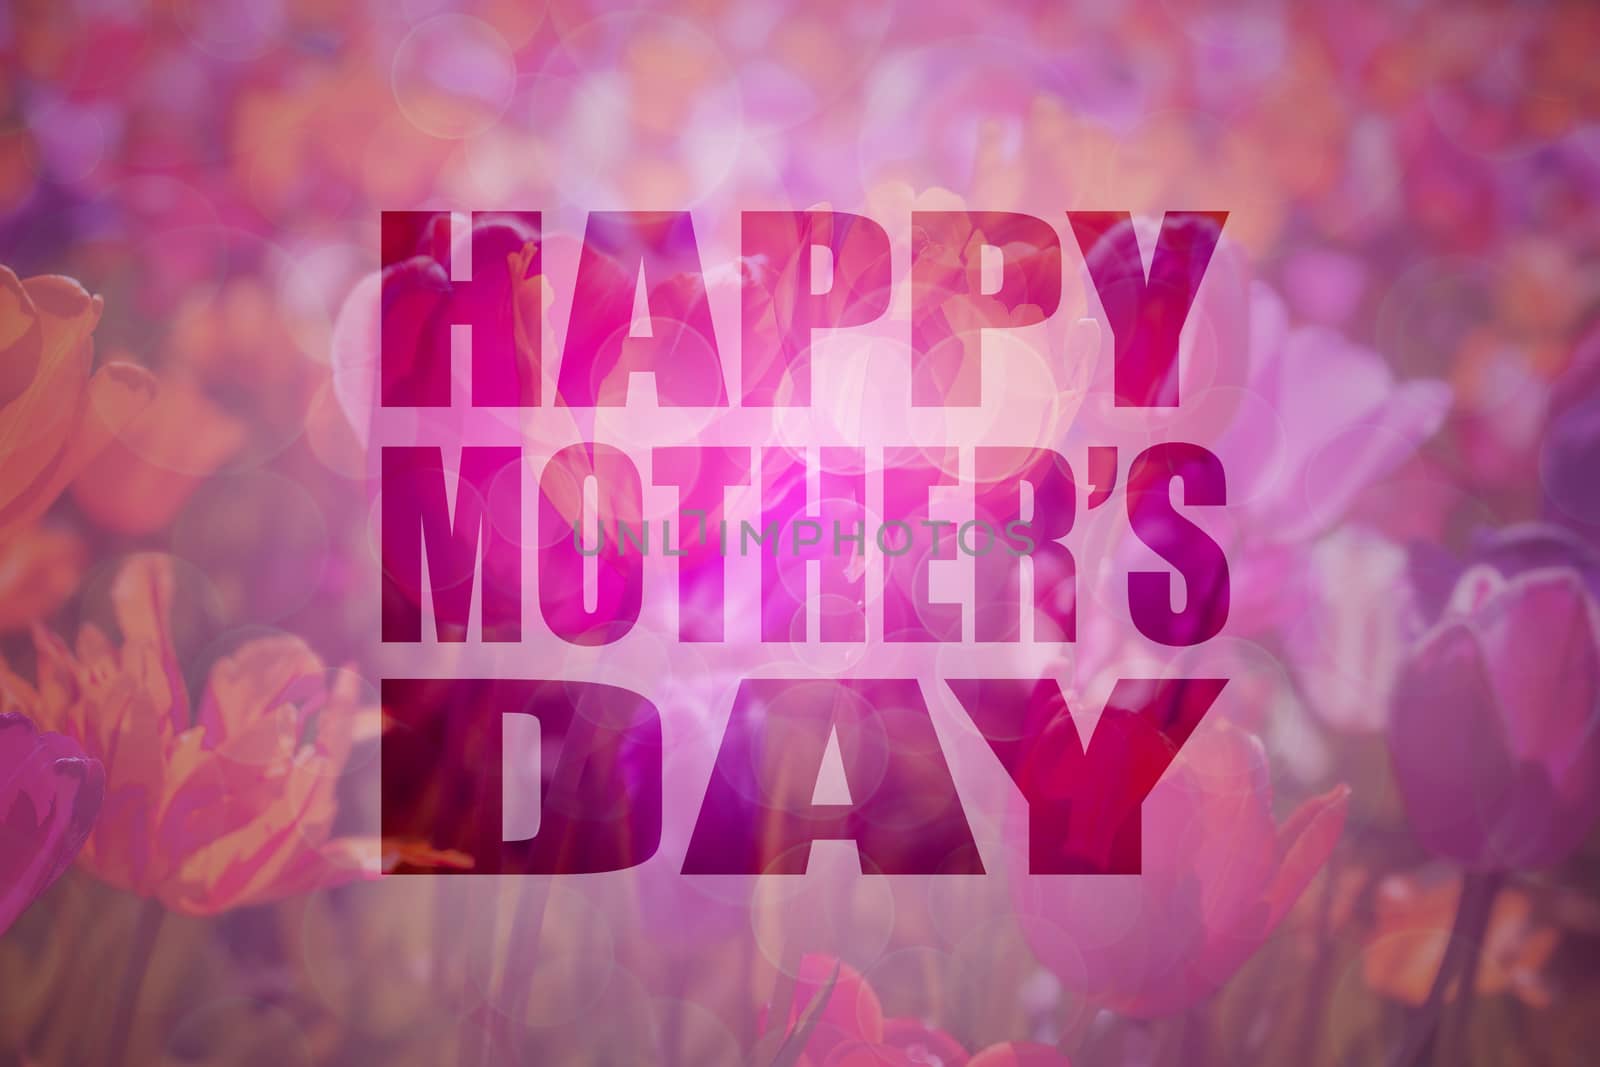 Happy Mothers Day Text Floral Background by jpldesigns